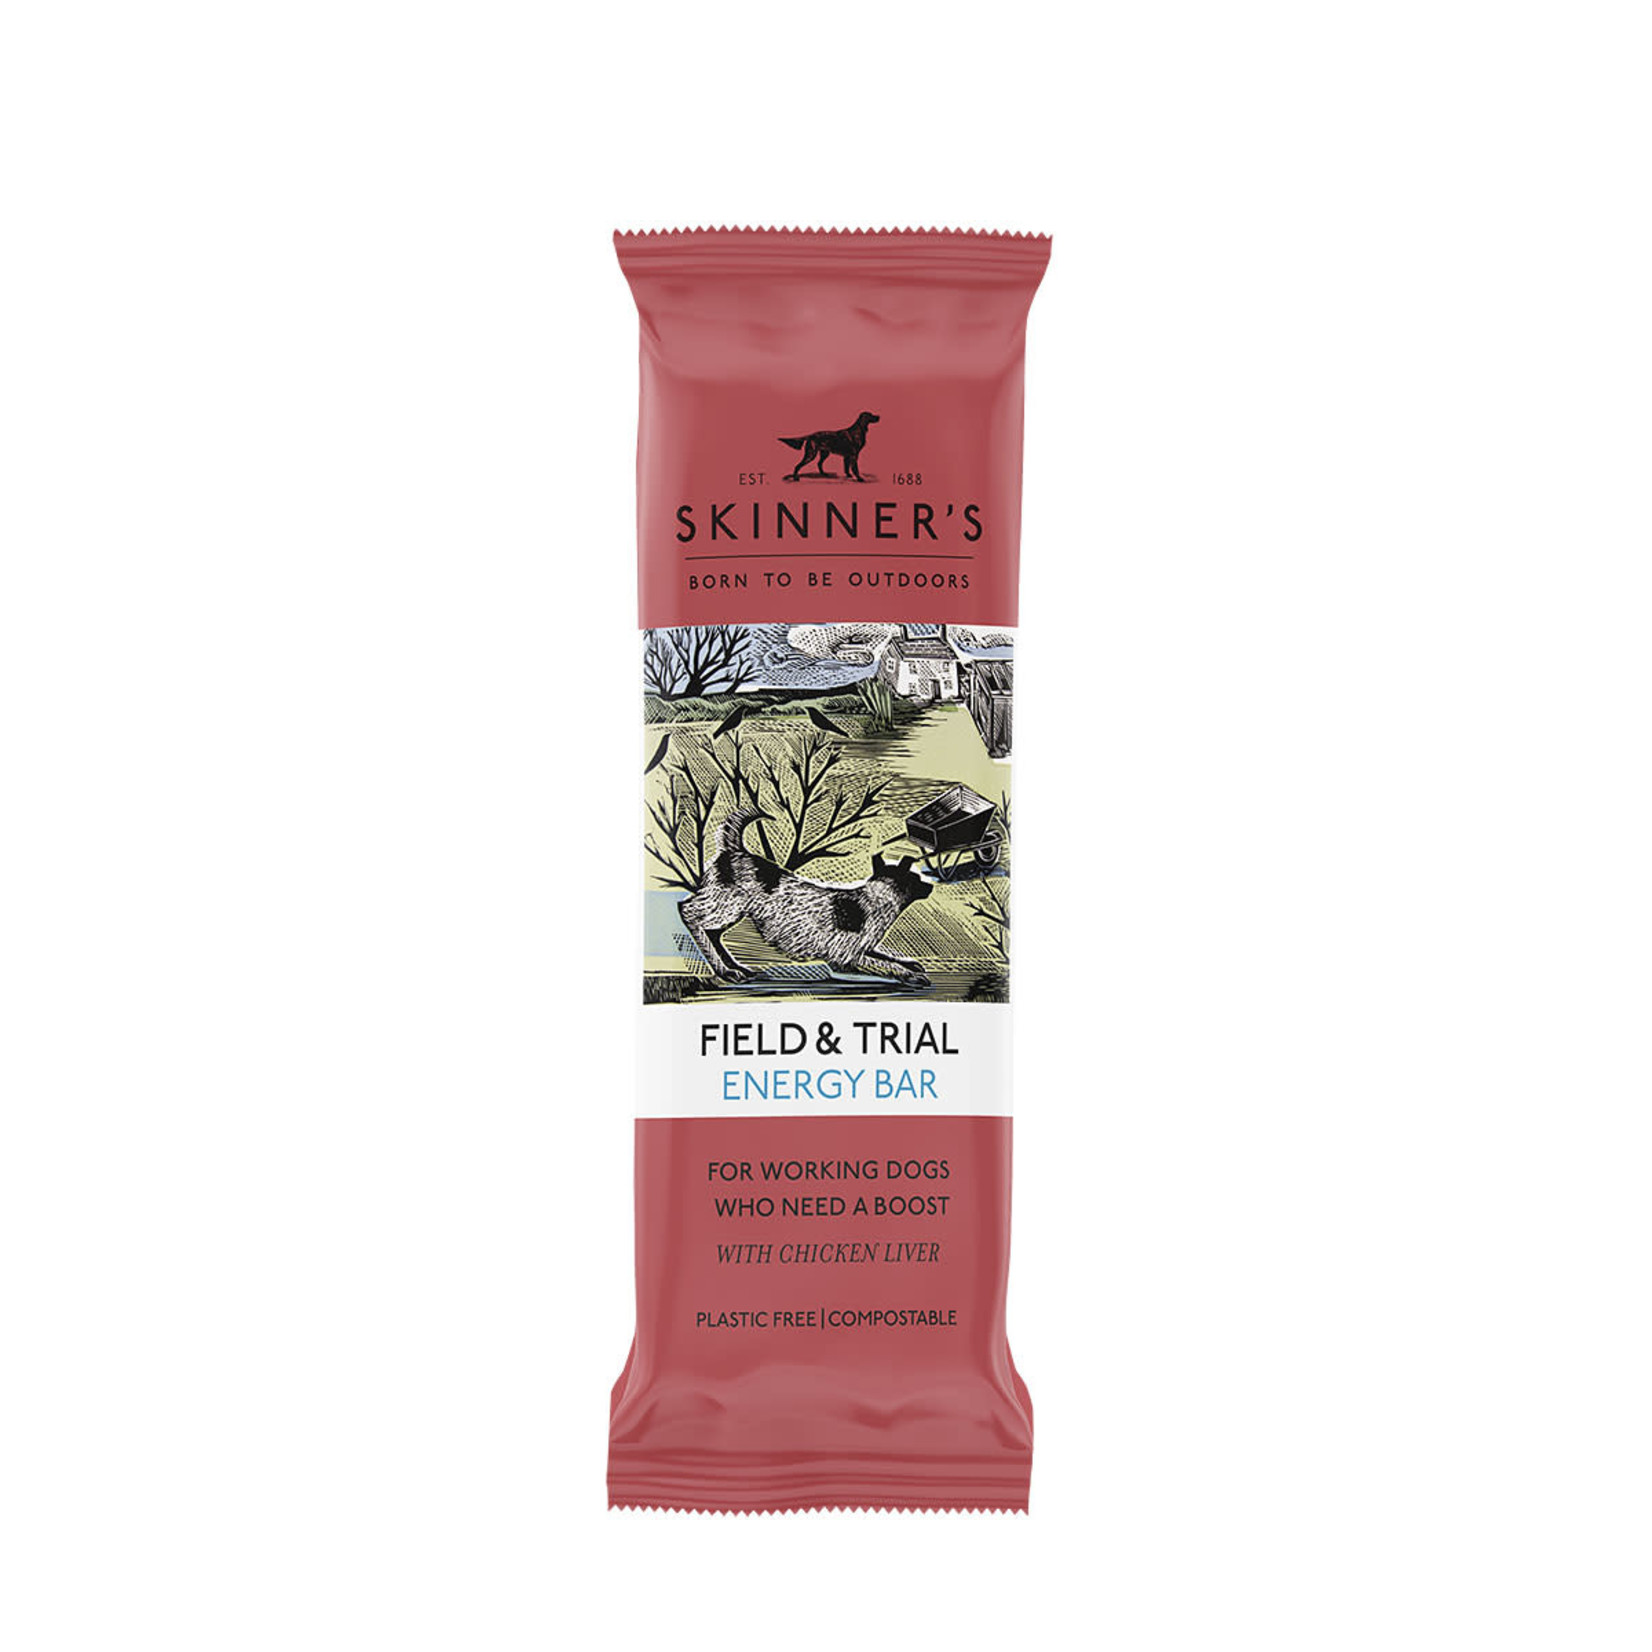 Skinners Field & Trial Energy Bar in a Compostable Wrapper for Dogs, Chicken Liver 35g